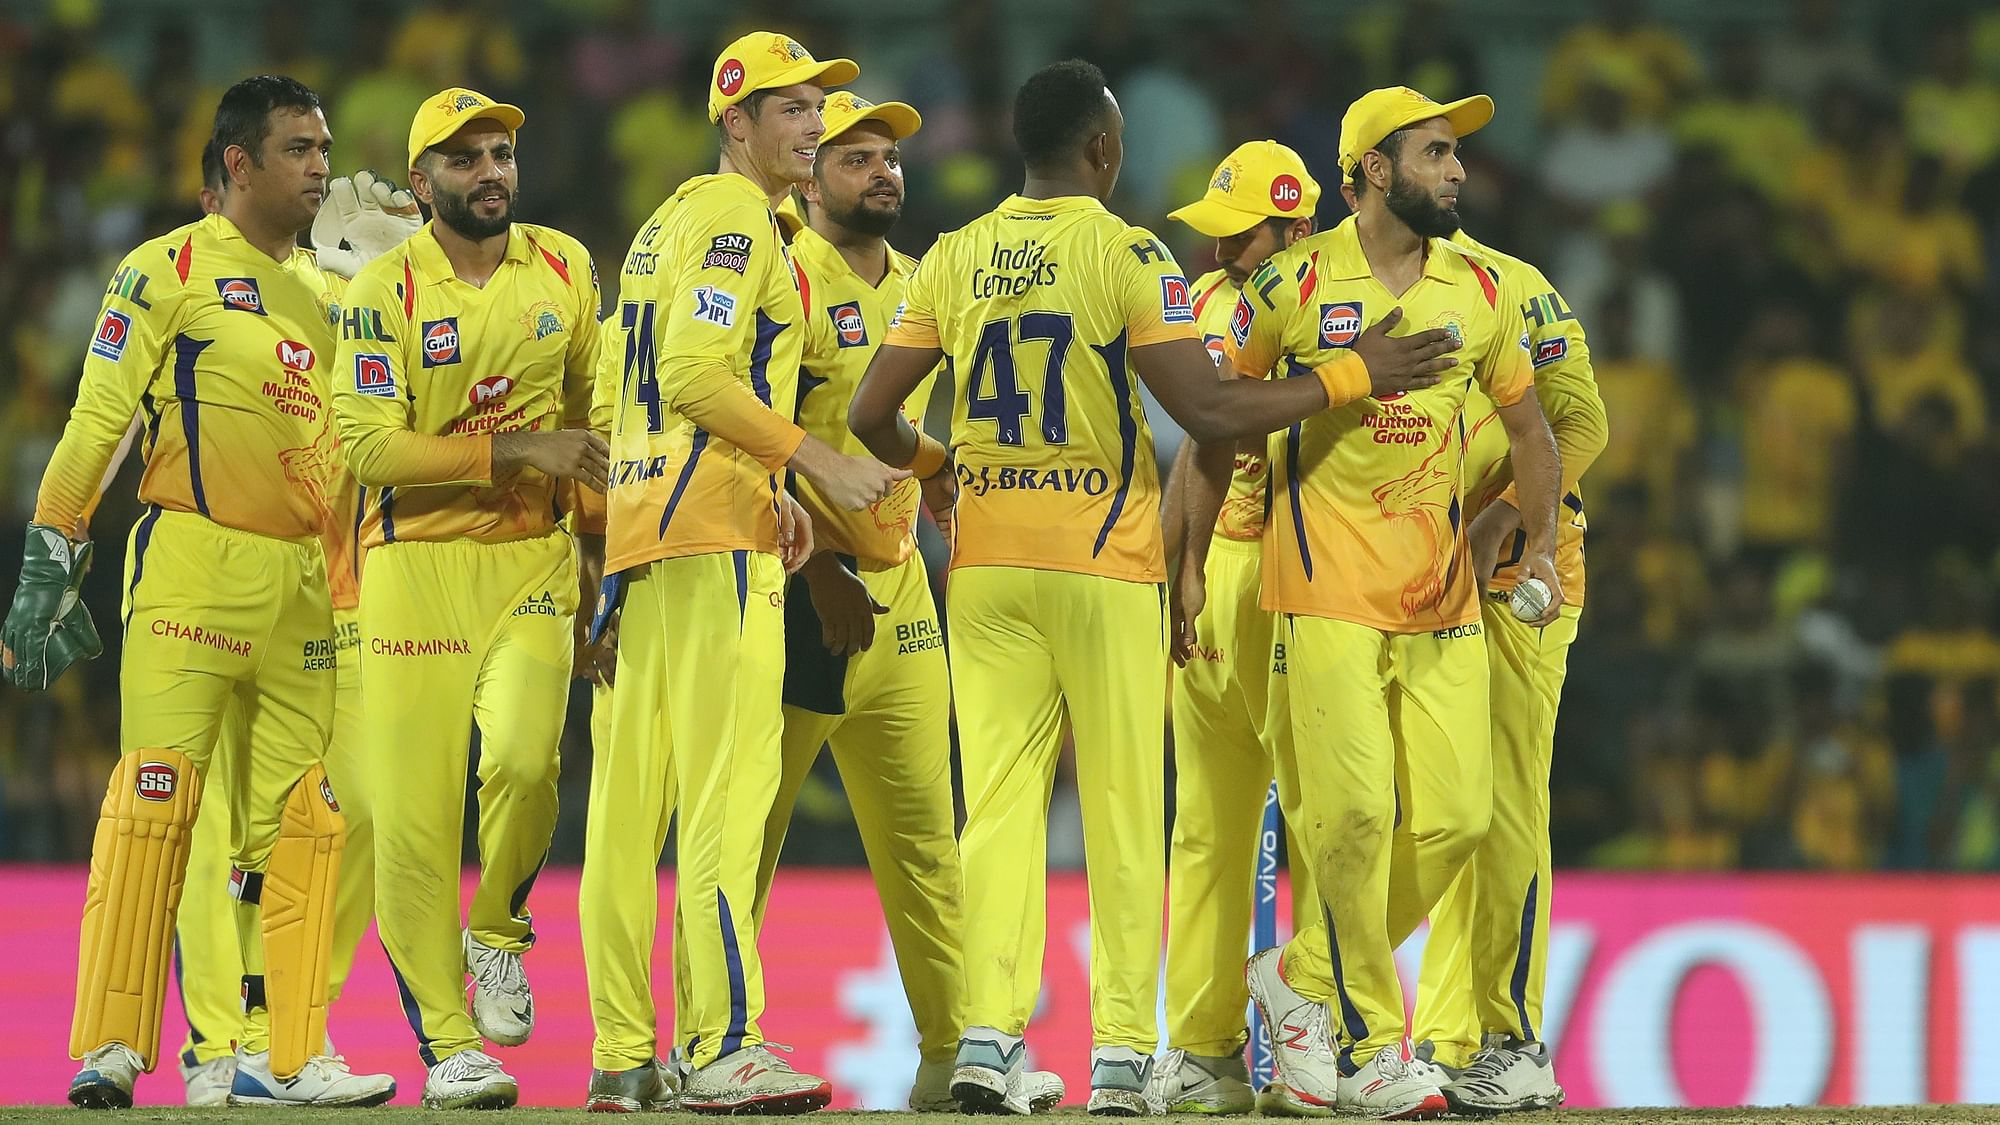 The Chennai bowlers then put in a disciplined effort to restrict Rajasthan Royals to 167/8.